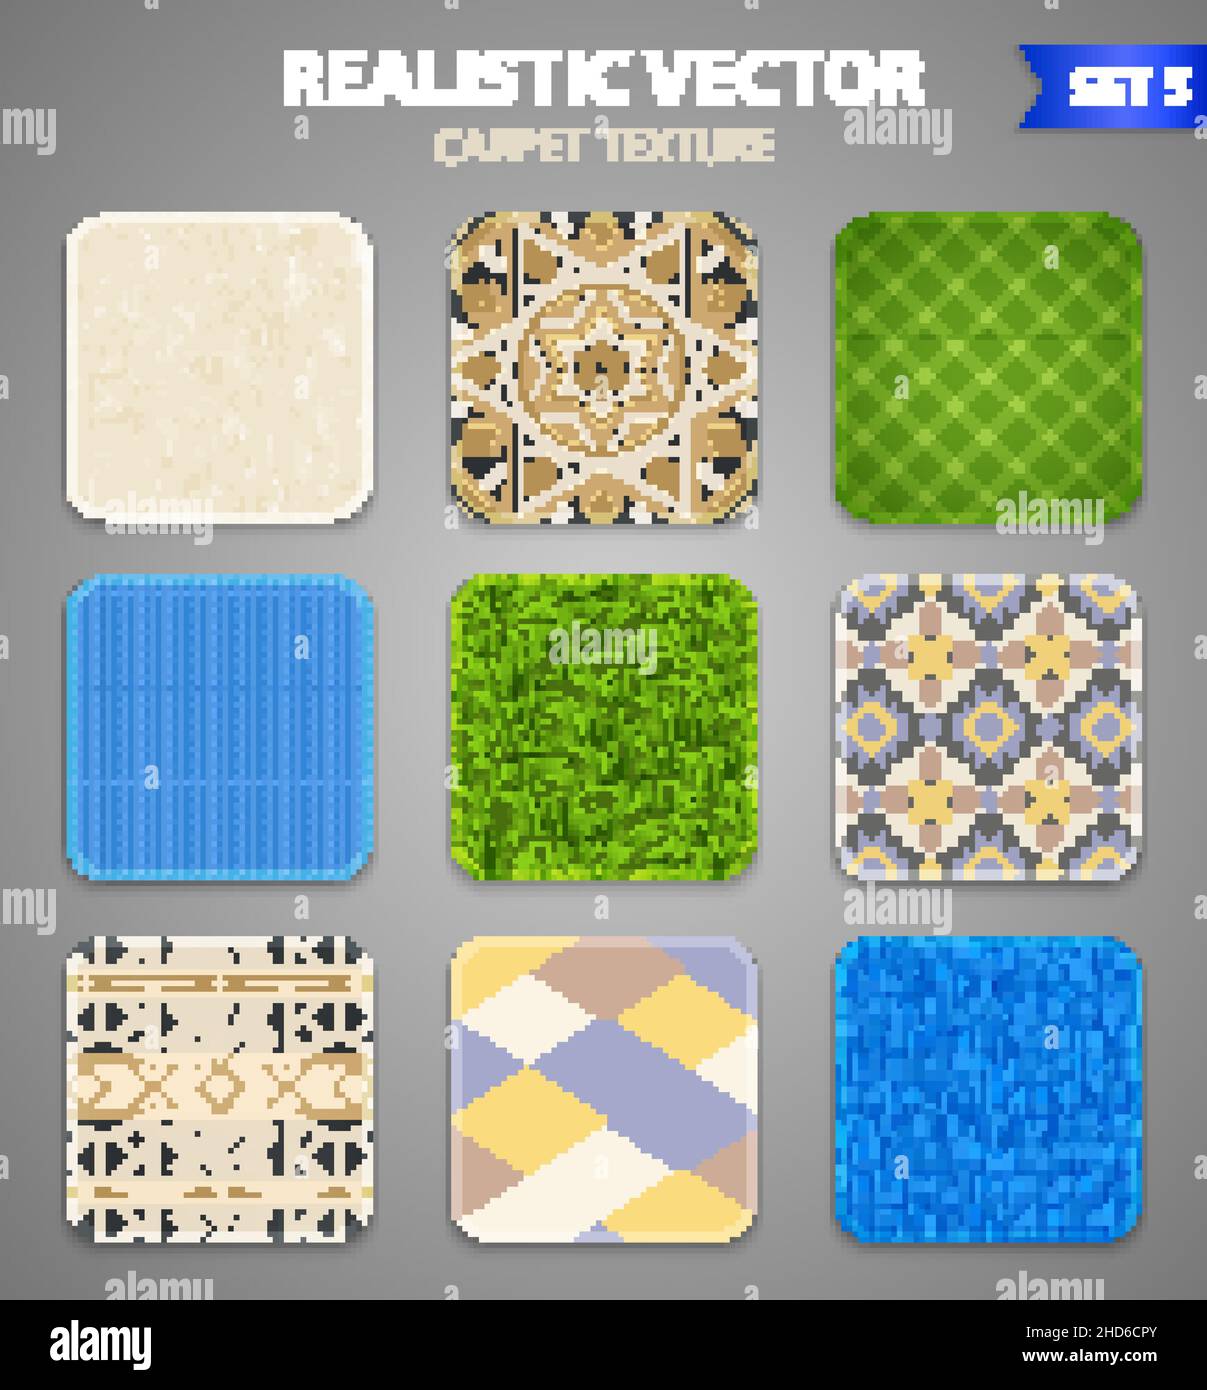 Carpet rugs floor covering texture patterns styles 9 realistic square samples collection on grey background vector illustration Stock Vector